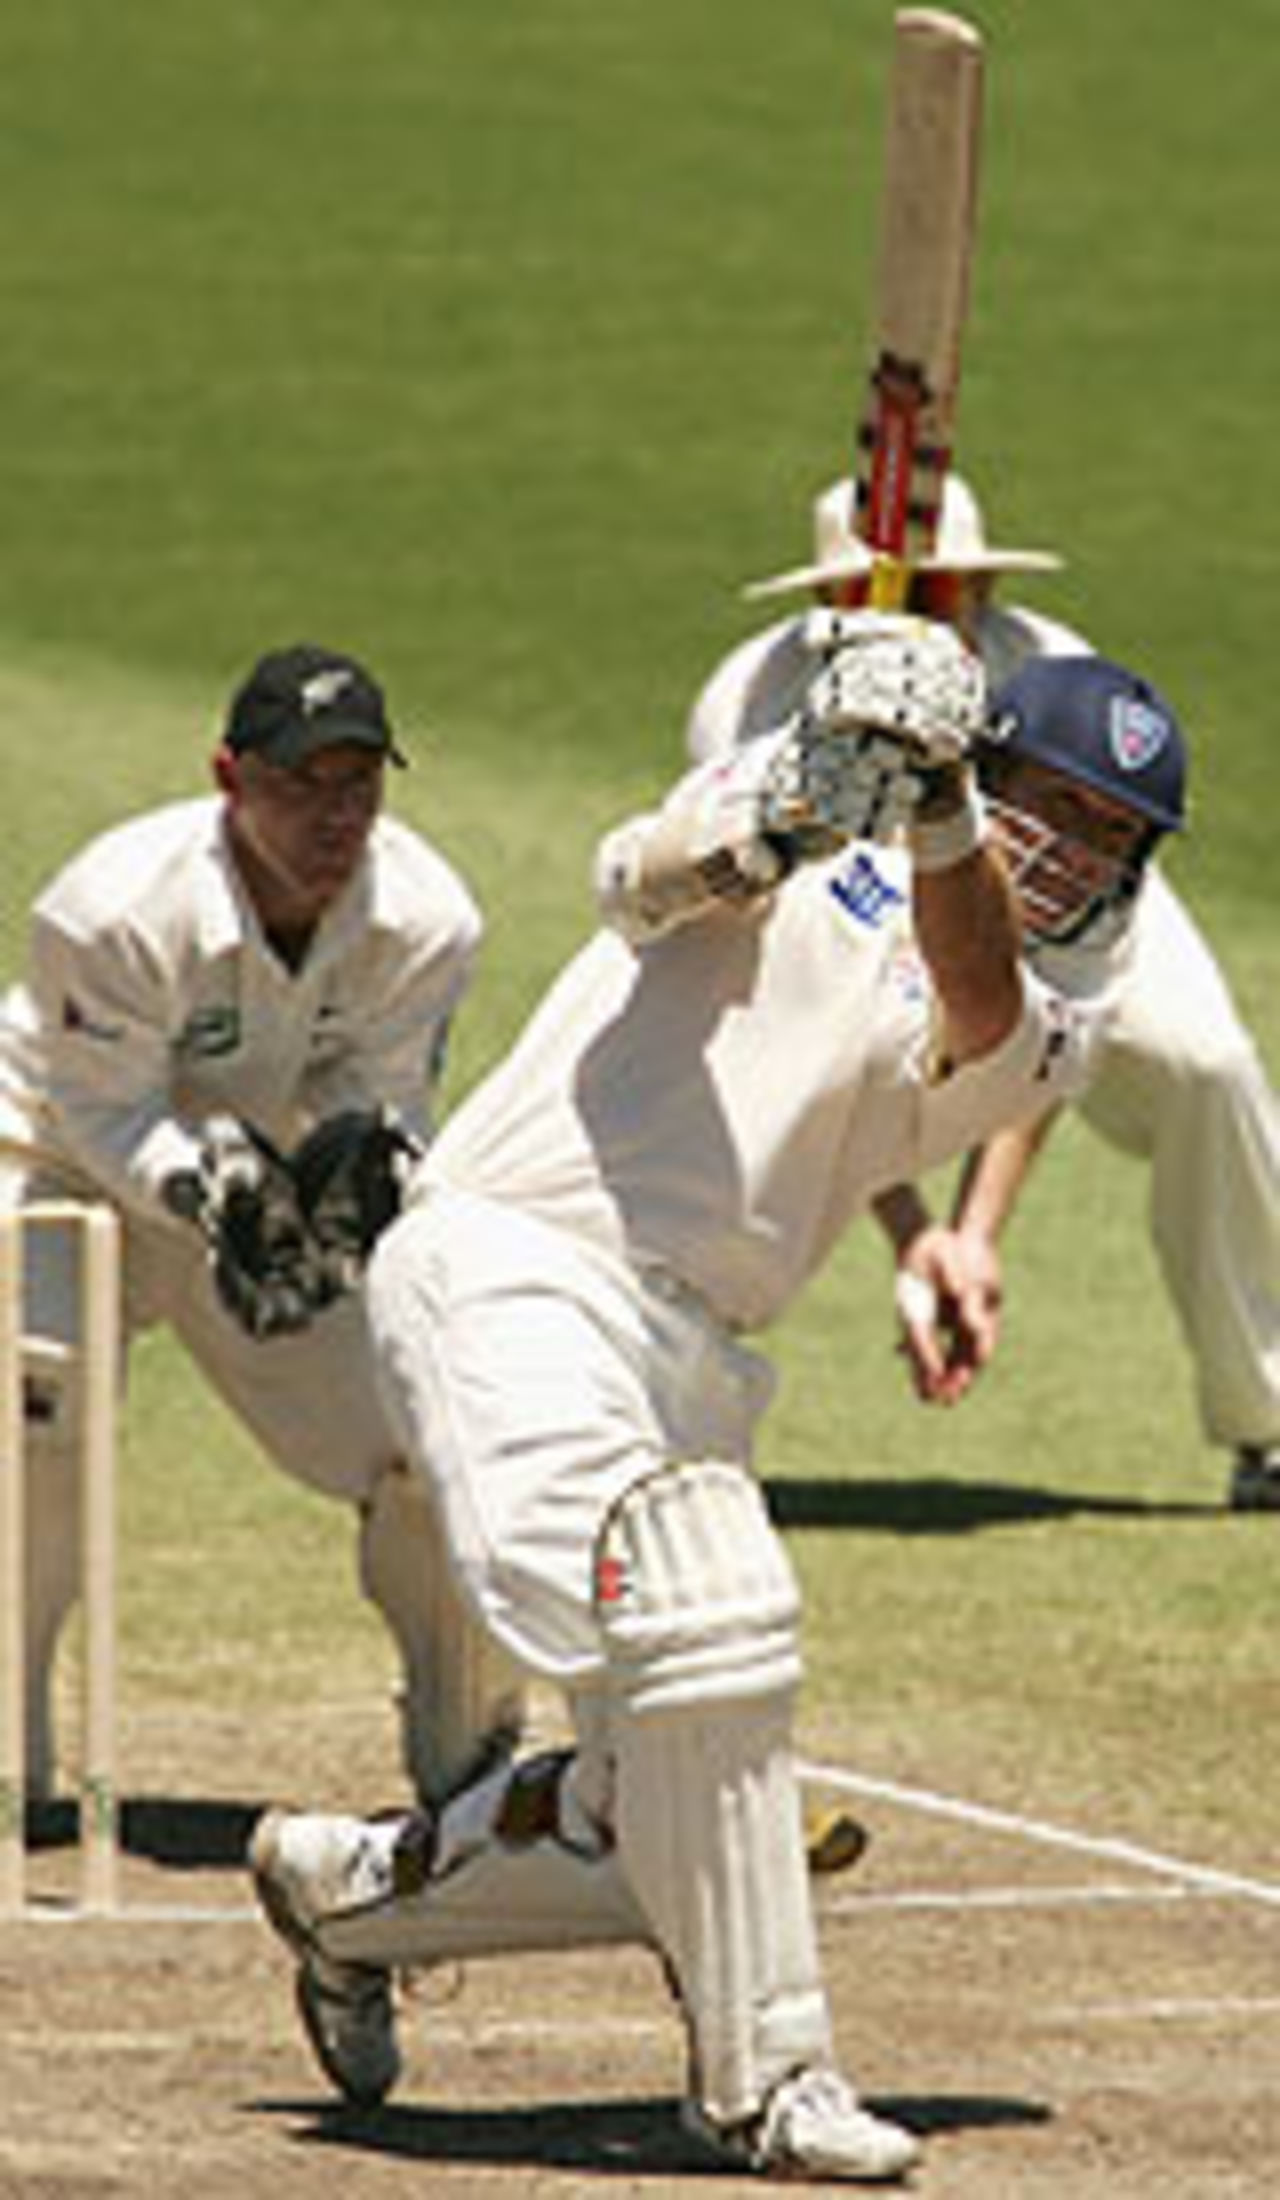 Phil Jaques hits one to leg, New south Wales v New Zealanders, 4th day, November 14th, 2004